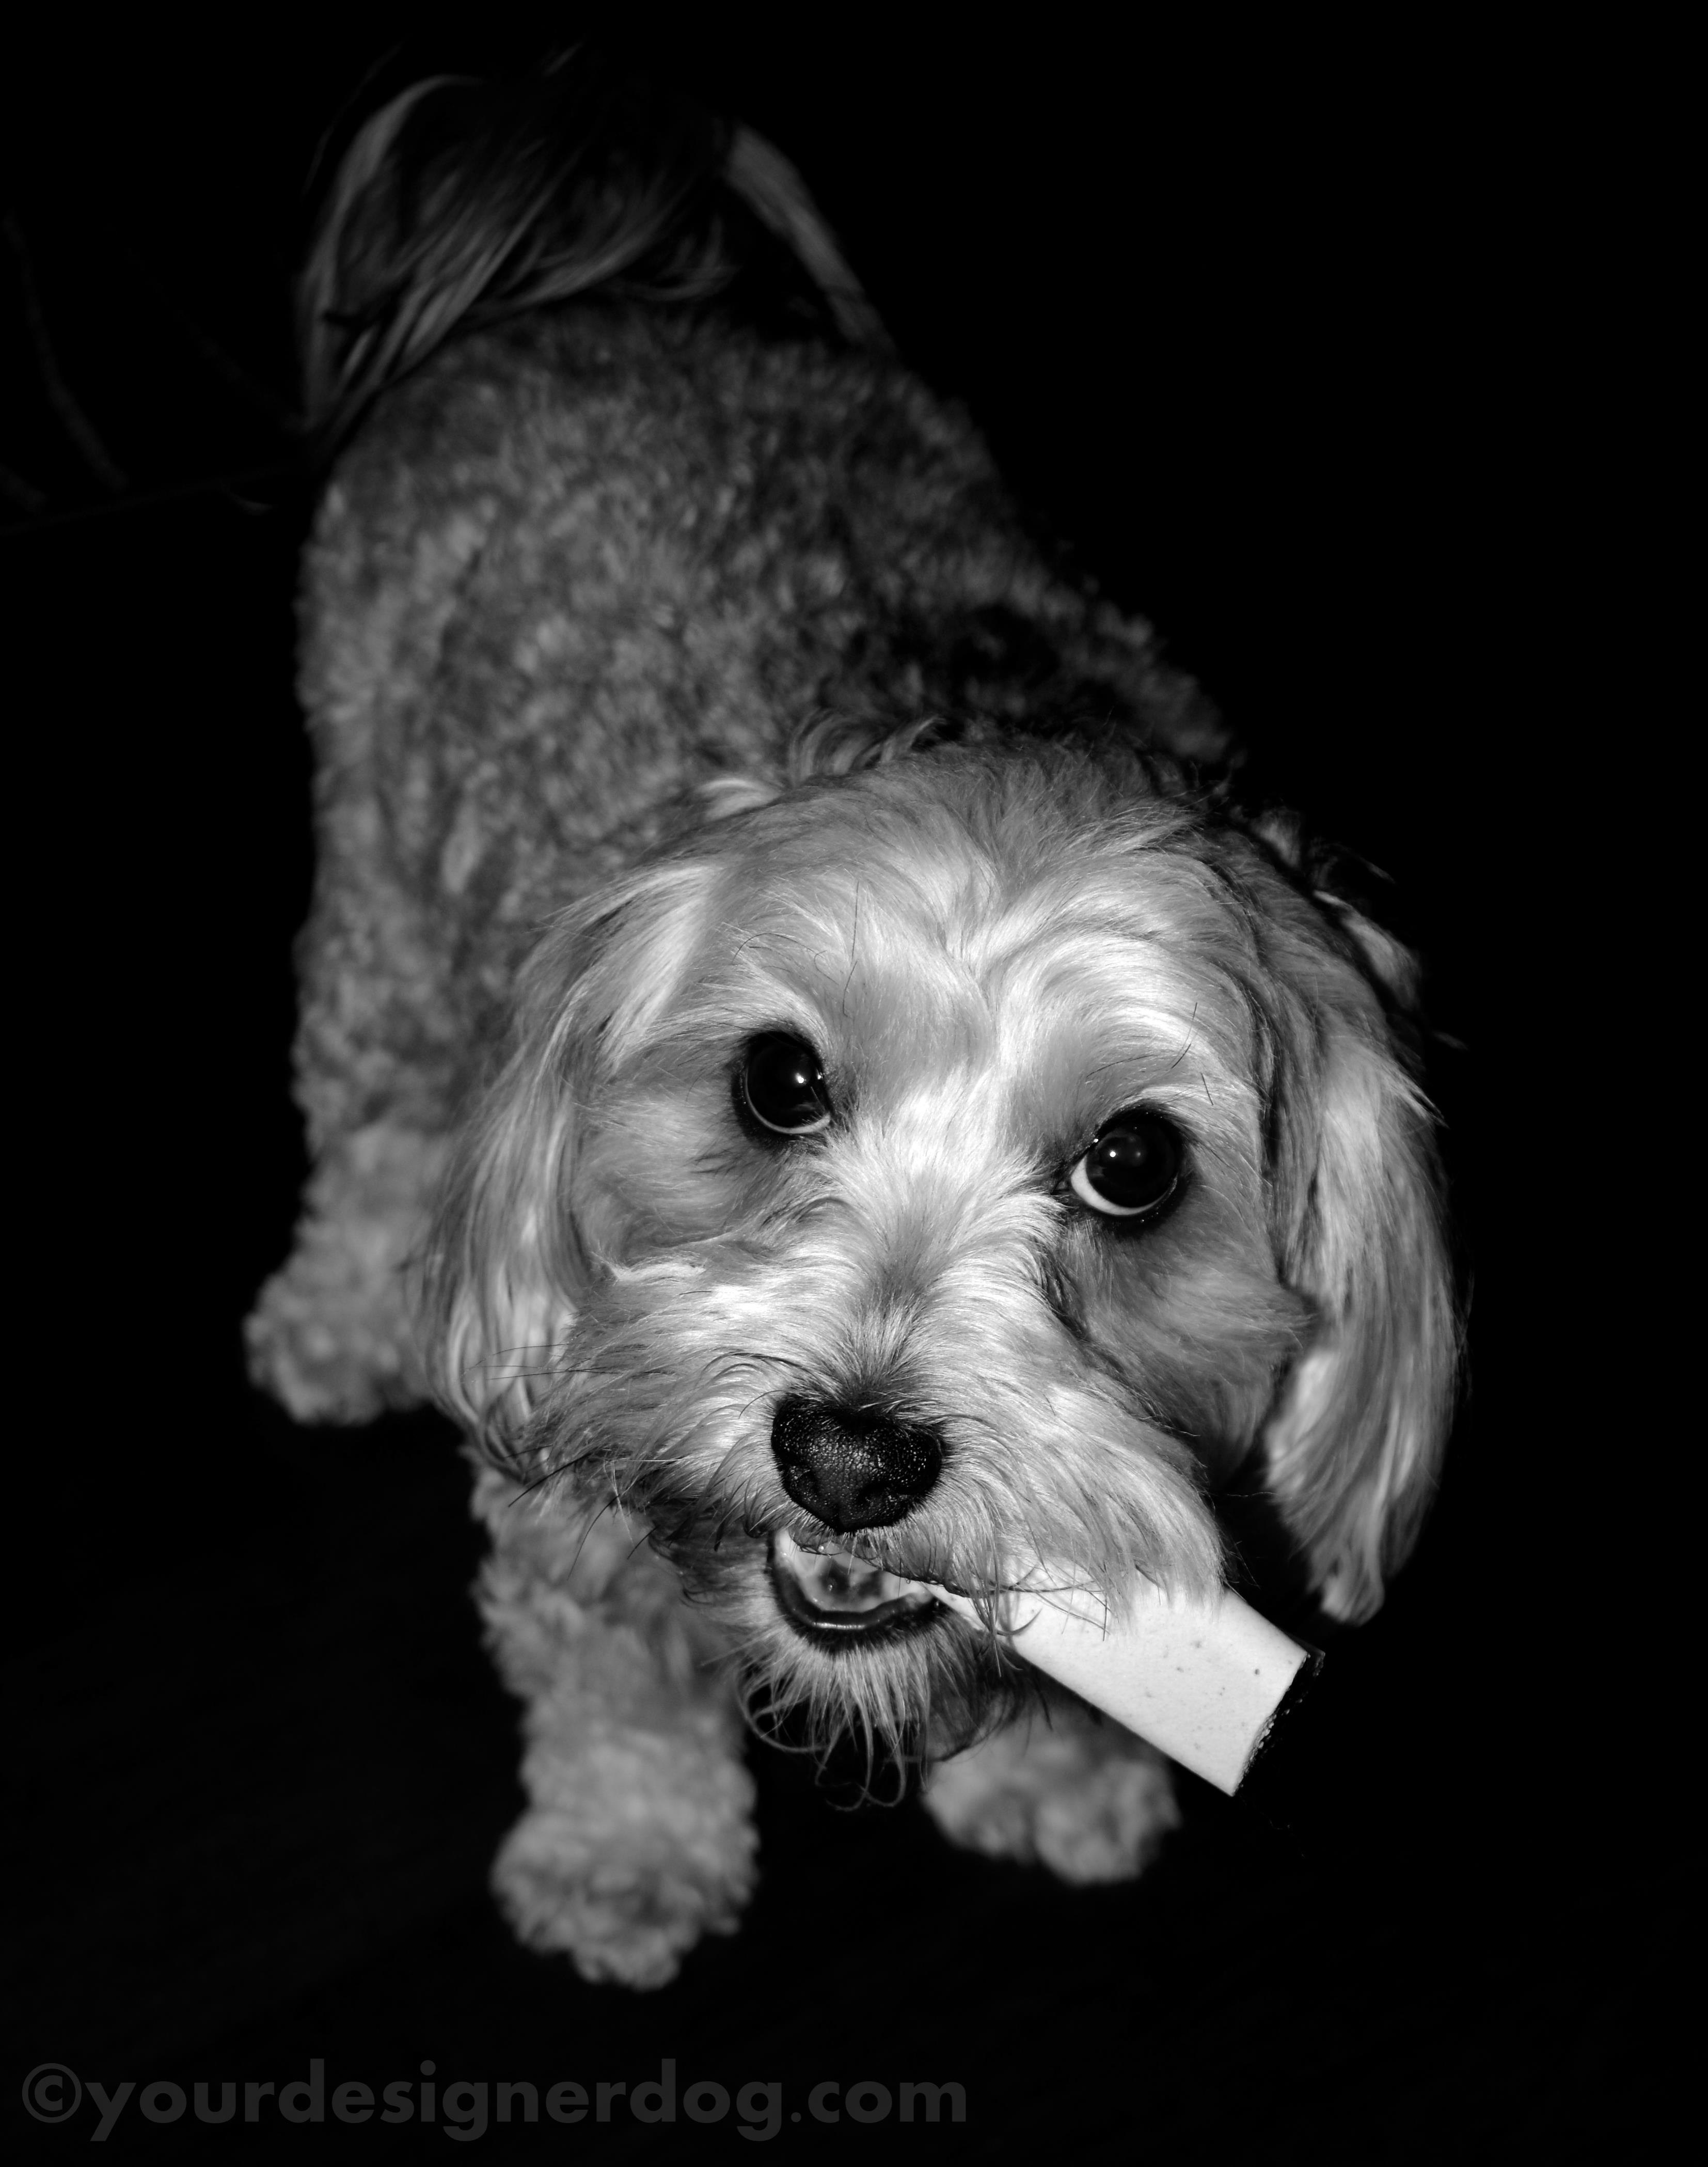 dogs, designer dogs, yorkipoo, yorkie poo, black and white photography, dog bone, snack